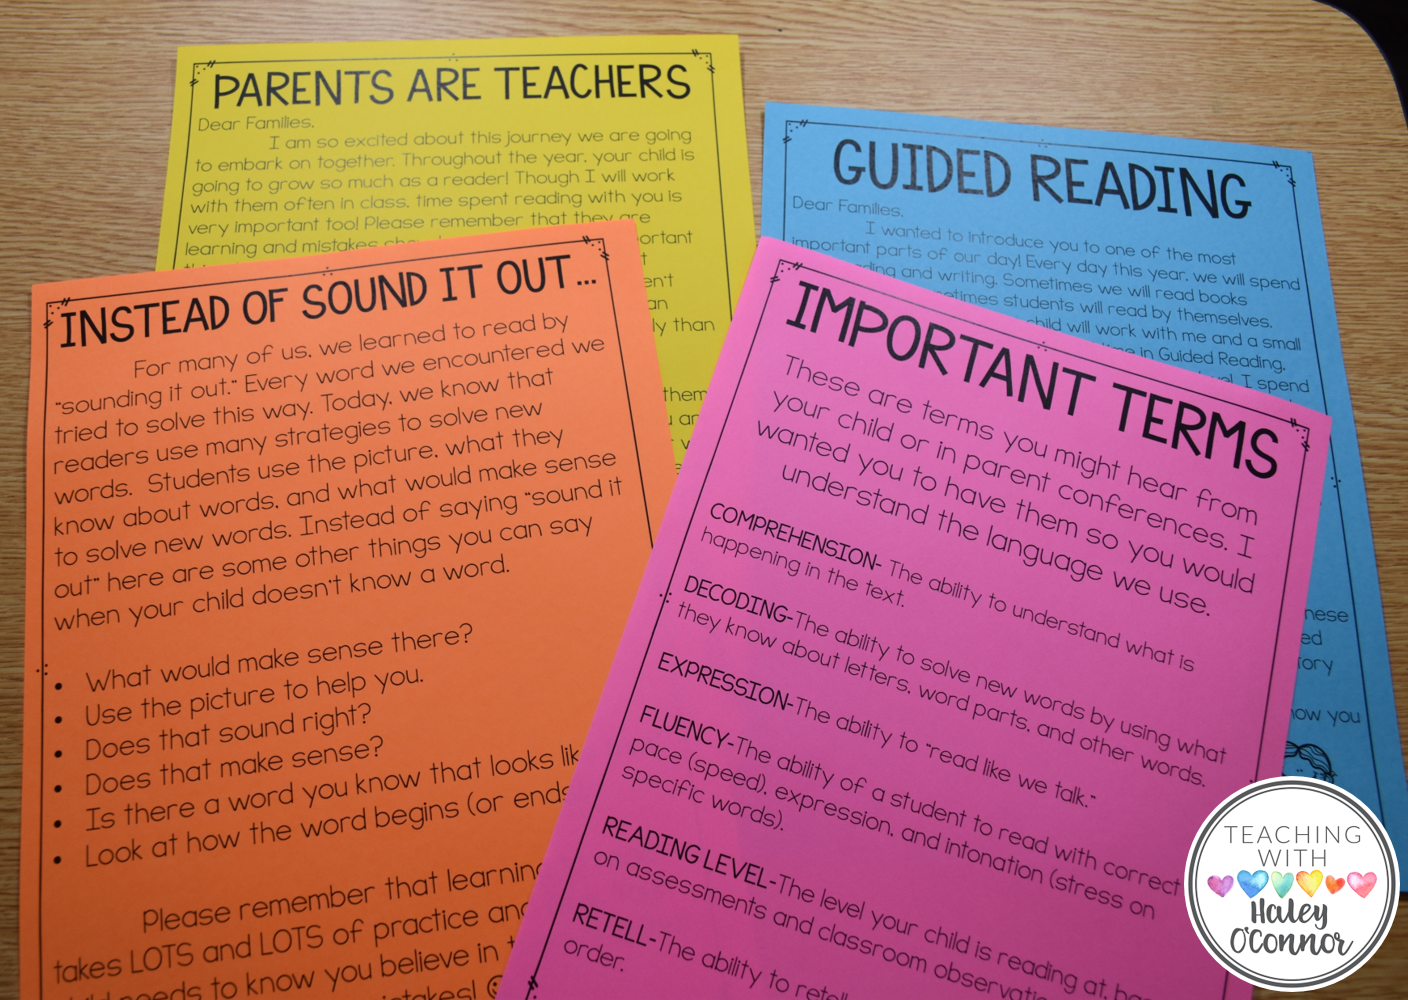 Parent Resources for Guided Reading